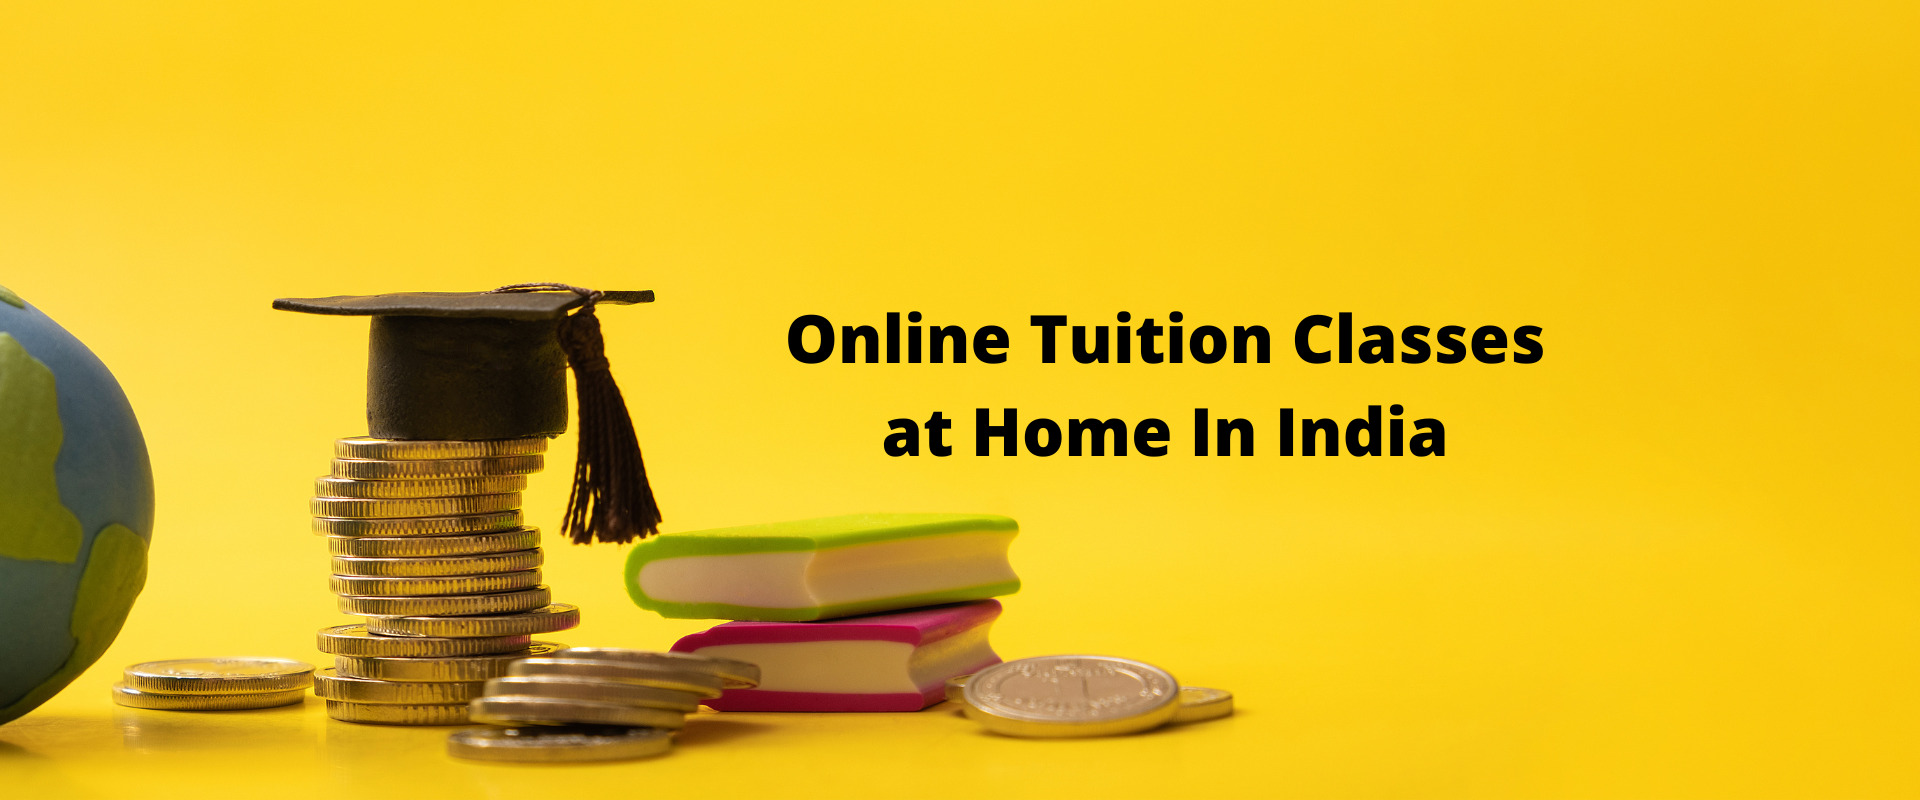 Online Tuition Classes at Home In India